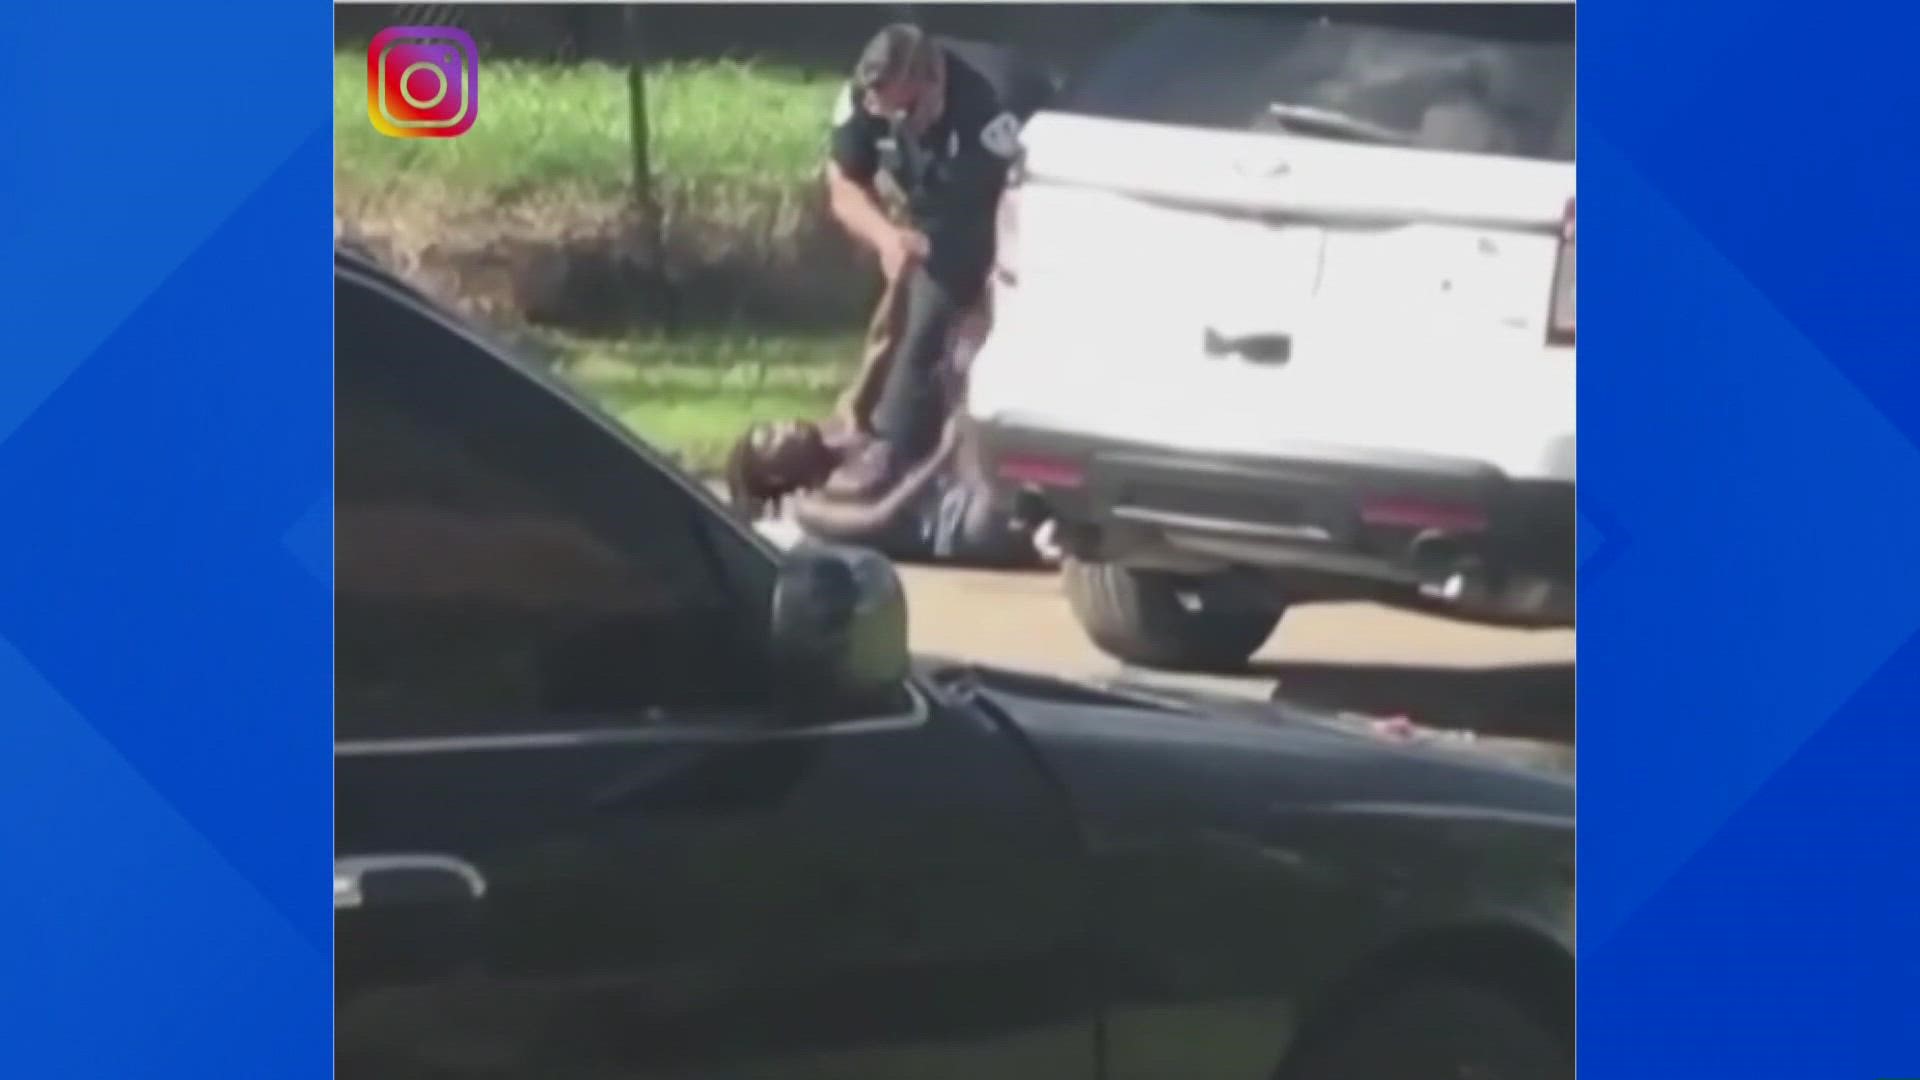 An investigation has been opened after video circulated of a Jefferson Parish deputy allegedly beating a woman and slamming her to the ground.